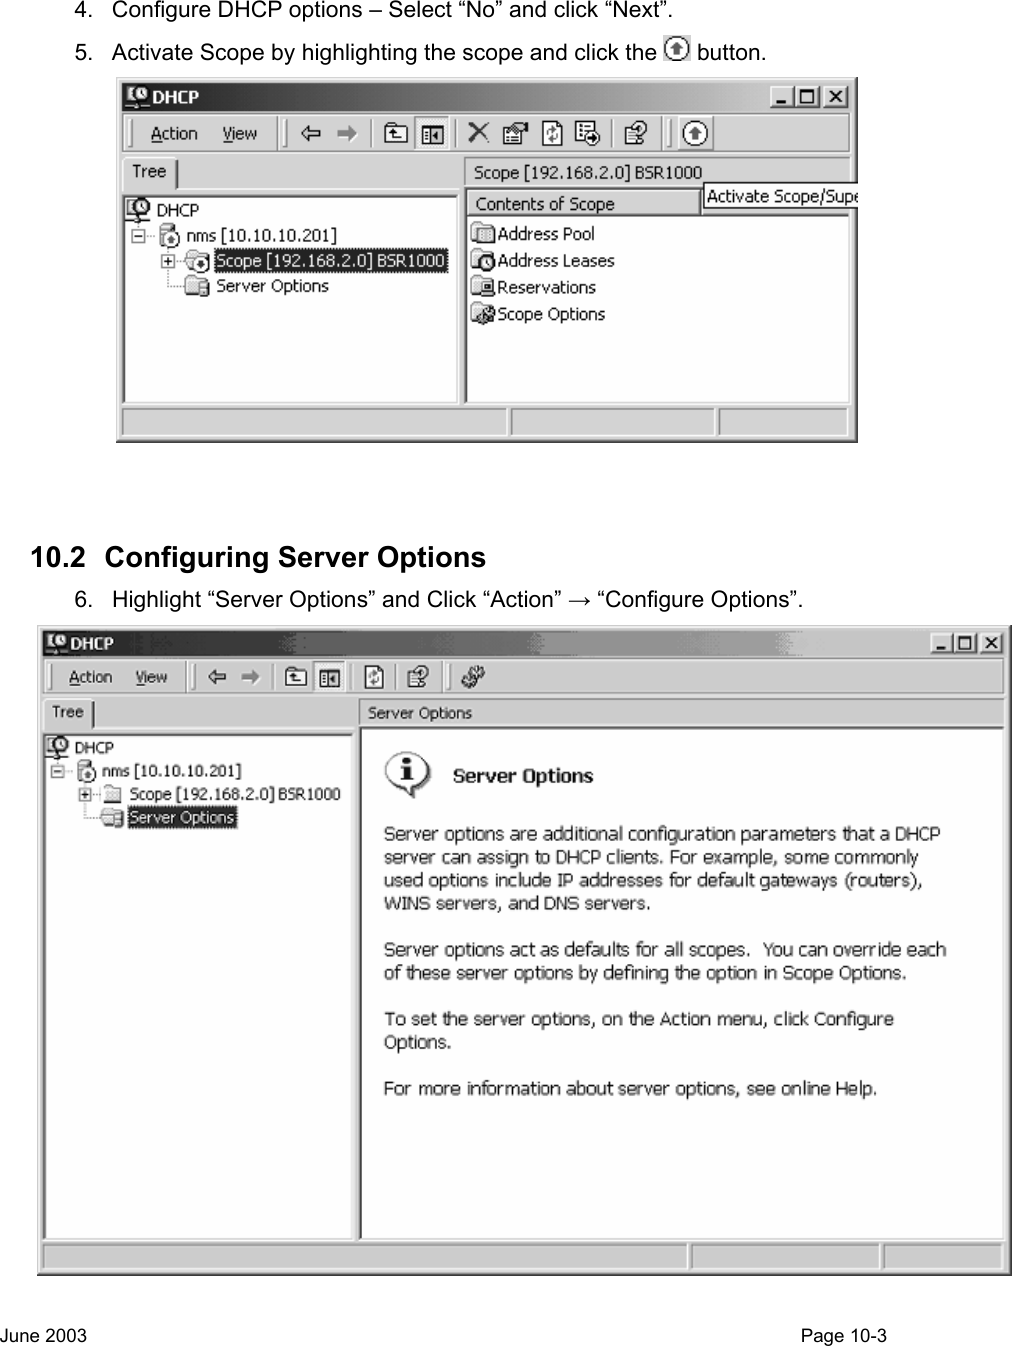    4.  Configure DHCP options – Select “No” and click “Next”. 5.  Activate Scope by highlighting the scope and click the   button.    10.2  Configuring Server Options 6.  Highlight “Server Options” and Click “Action” → “Configure Options”.  June 2003                                                                                                                                         Page 10-3  